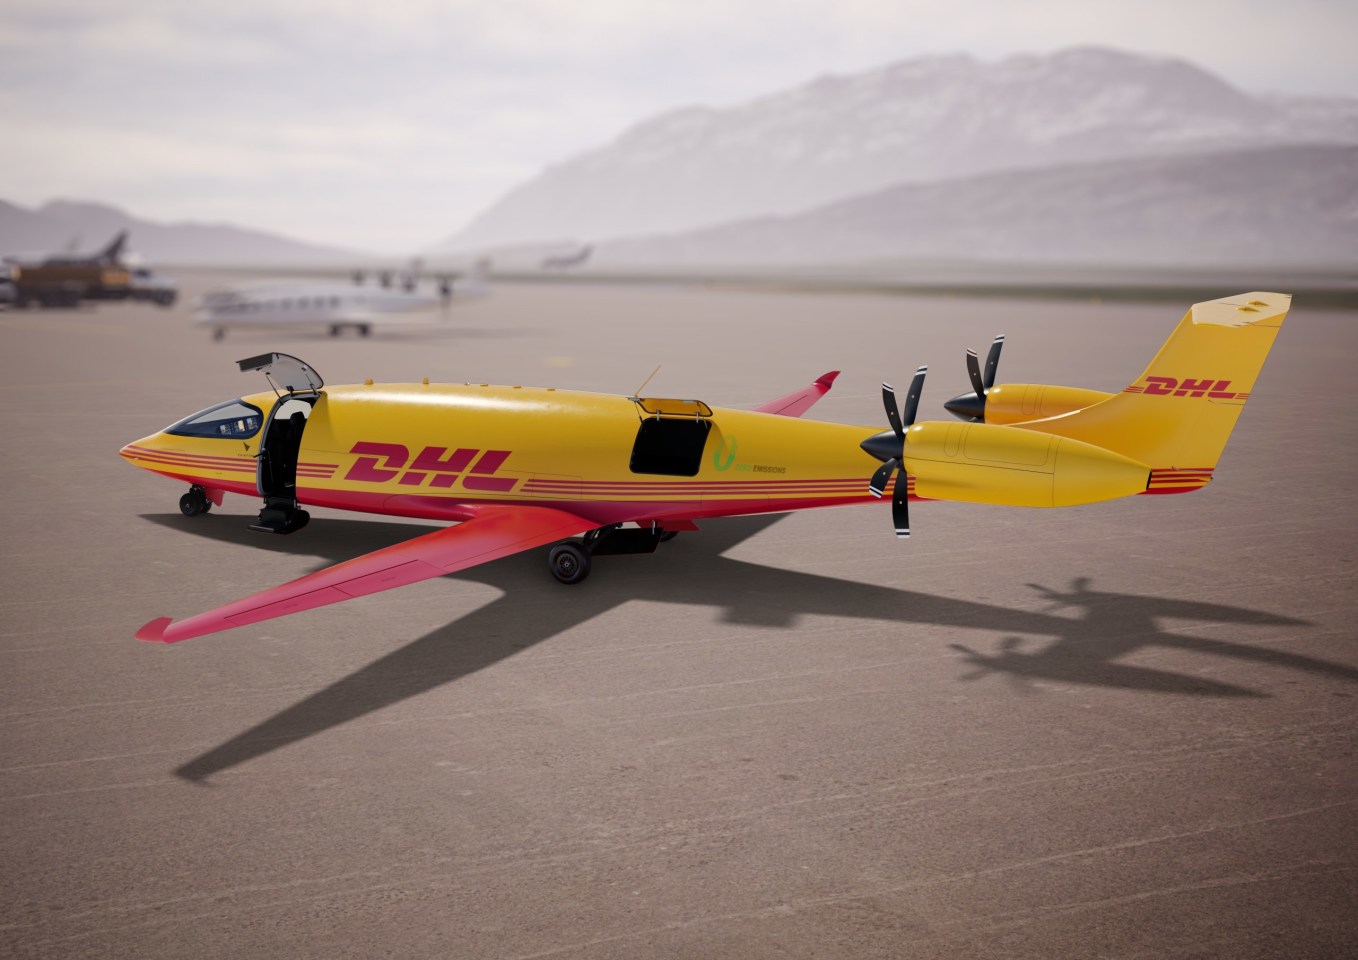 The single-pilot all-electric Alice eCargo has a per-charge range of 440 nautical miles, with the battery pack topped up while the aircraft is on the ground during loading and unloading operations